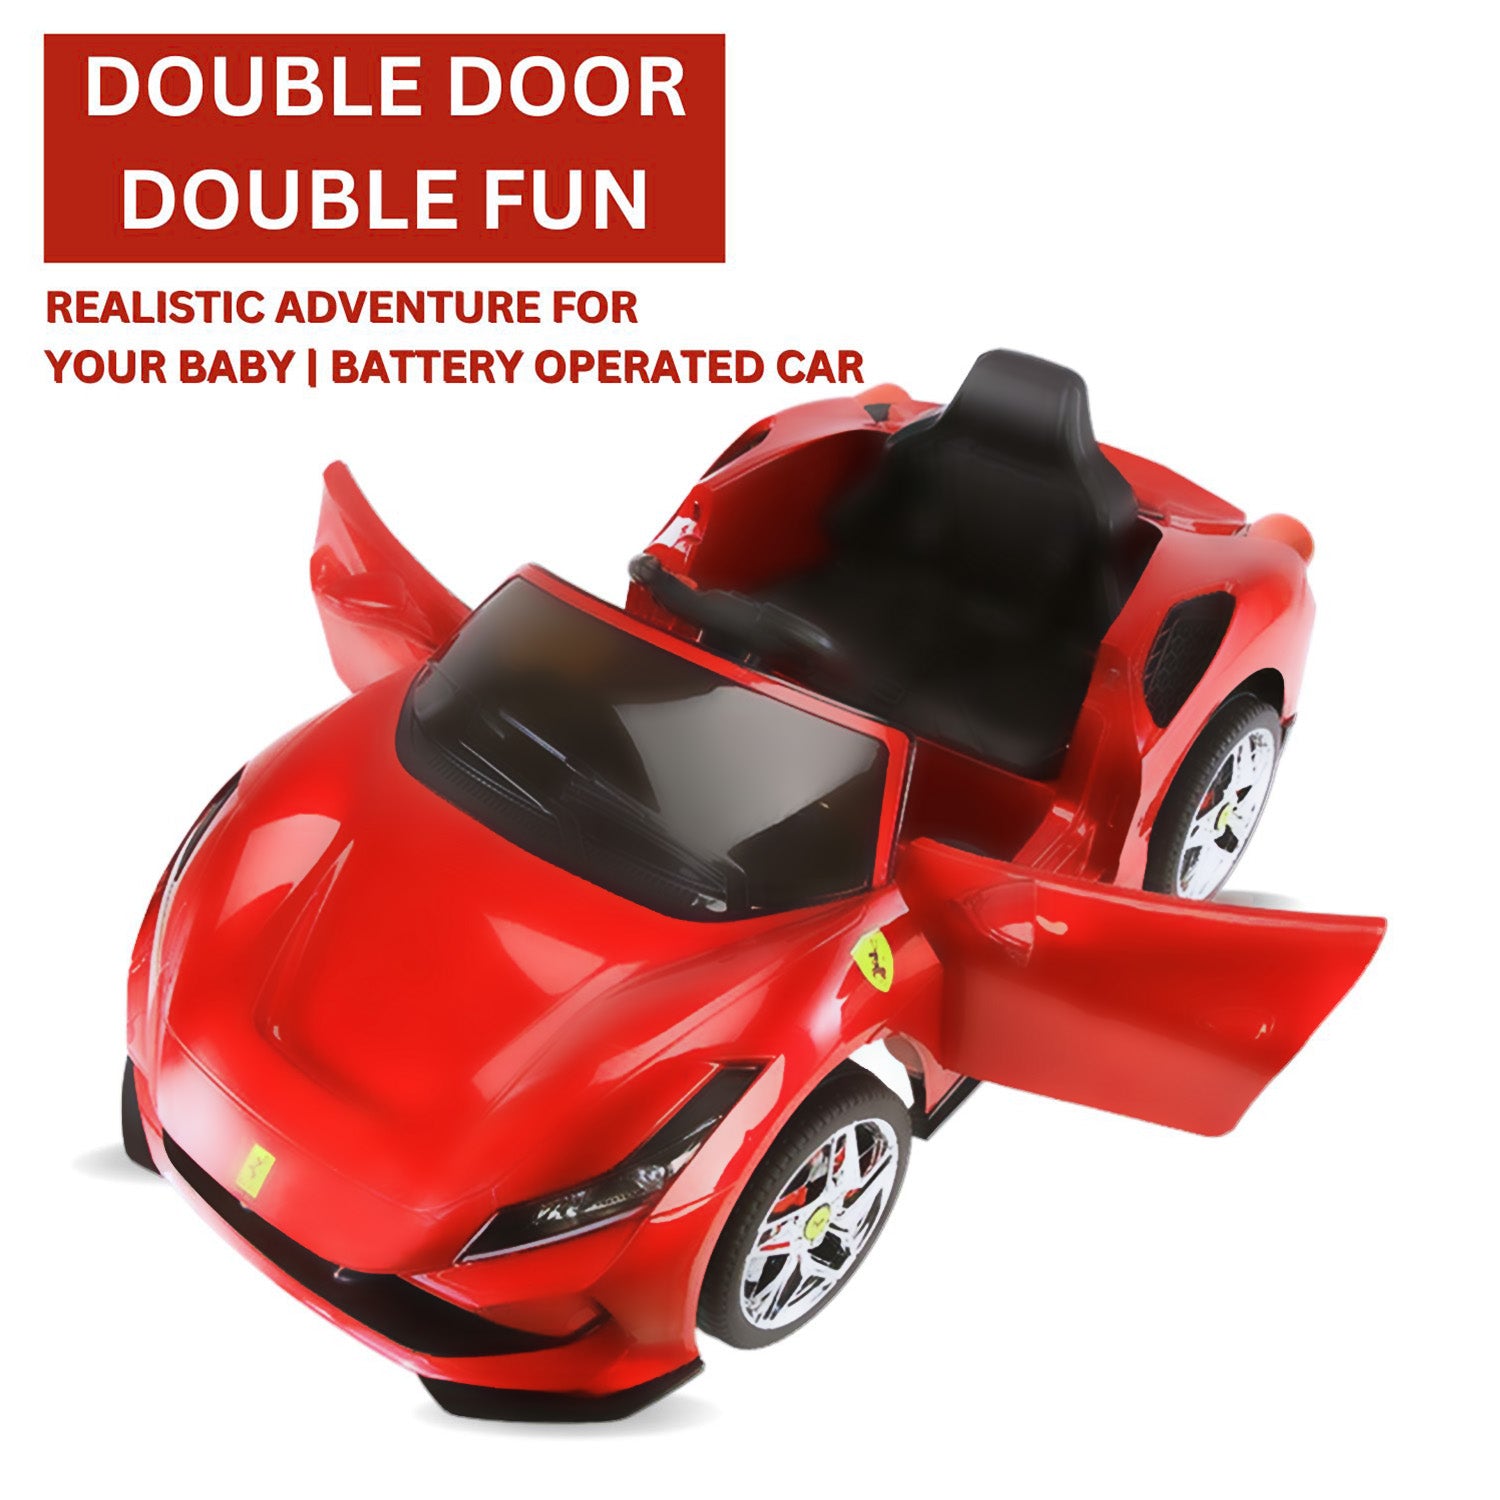 Baby Moo Ferrari F8 12V Battery Operated Ride On Car for Kids | Remote Control | Rechargeable Battery | USB MP3 Player | Ages 2-8 - Red - Baby Moo